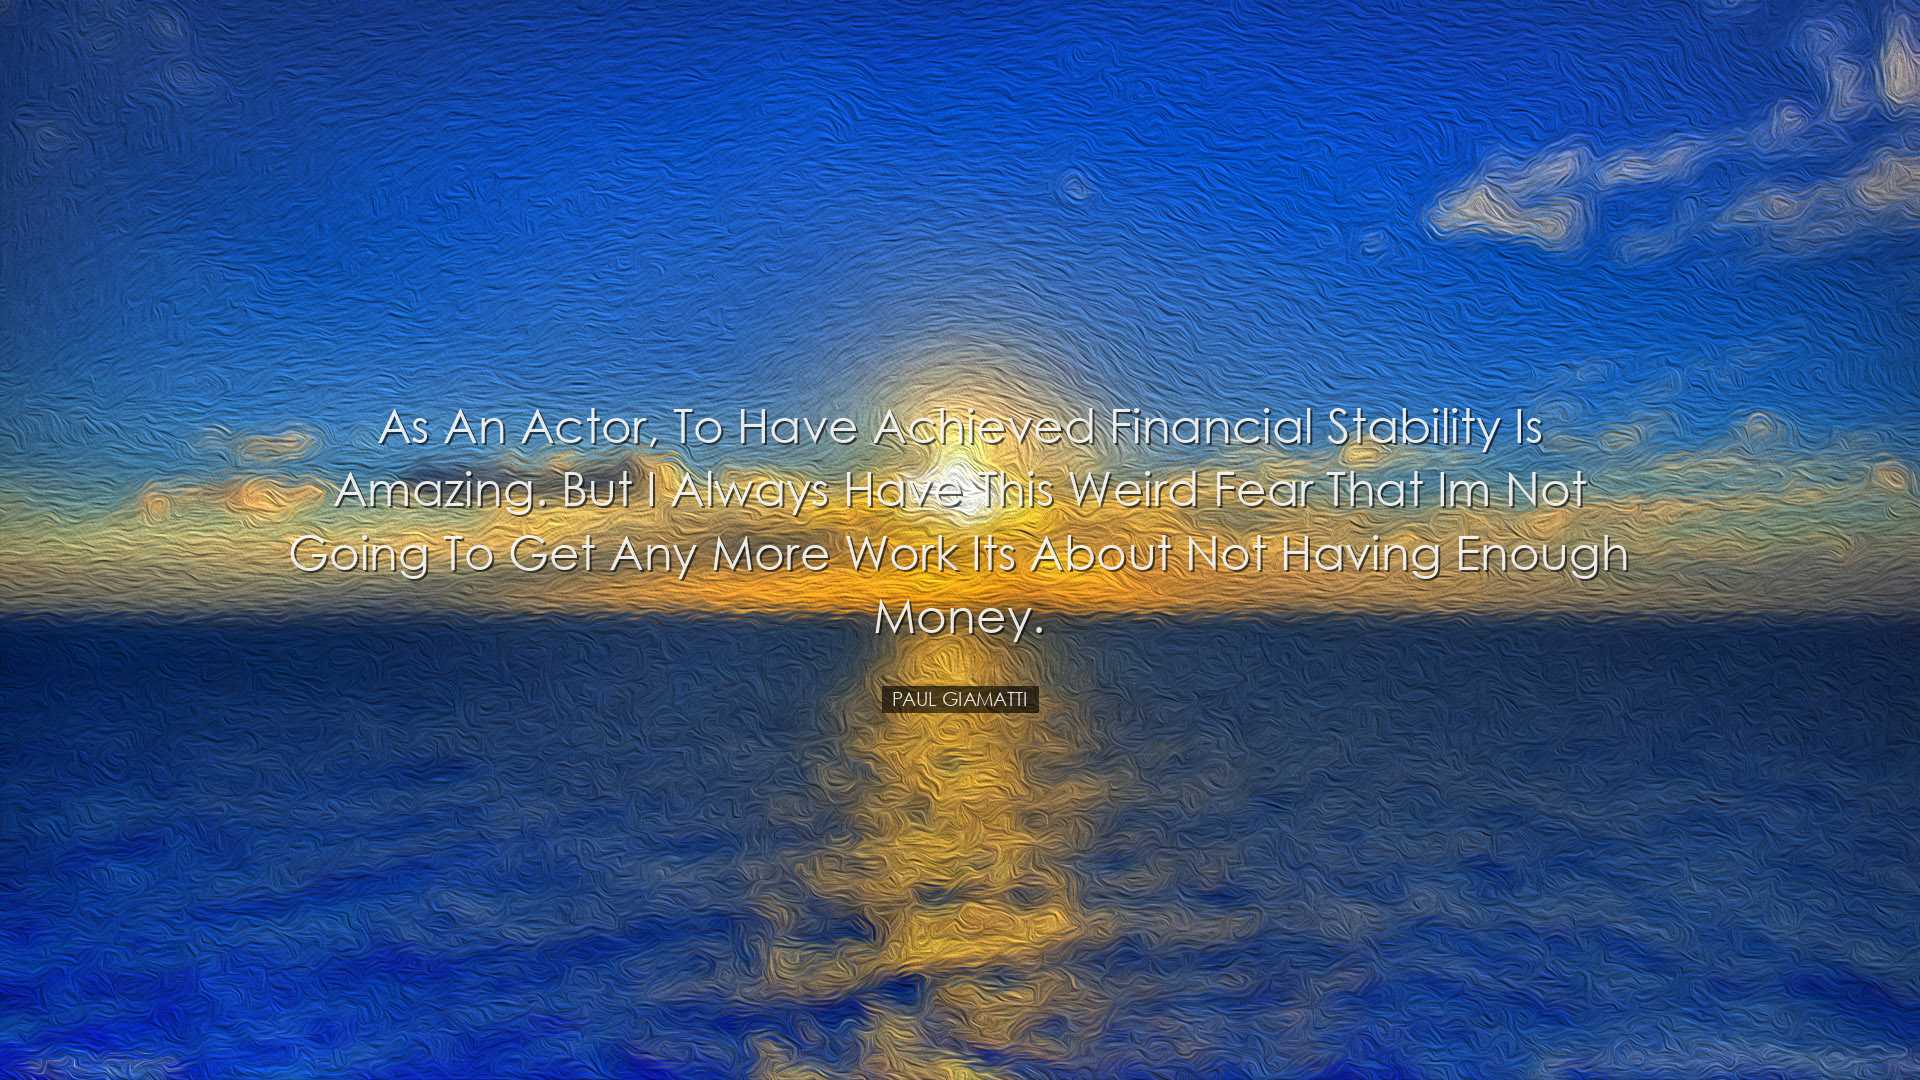 As an actor, to have achieved financial stability is amazing. But